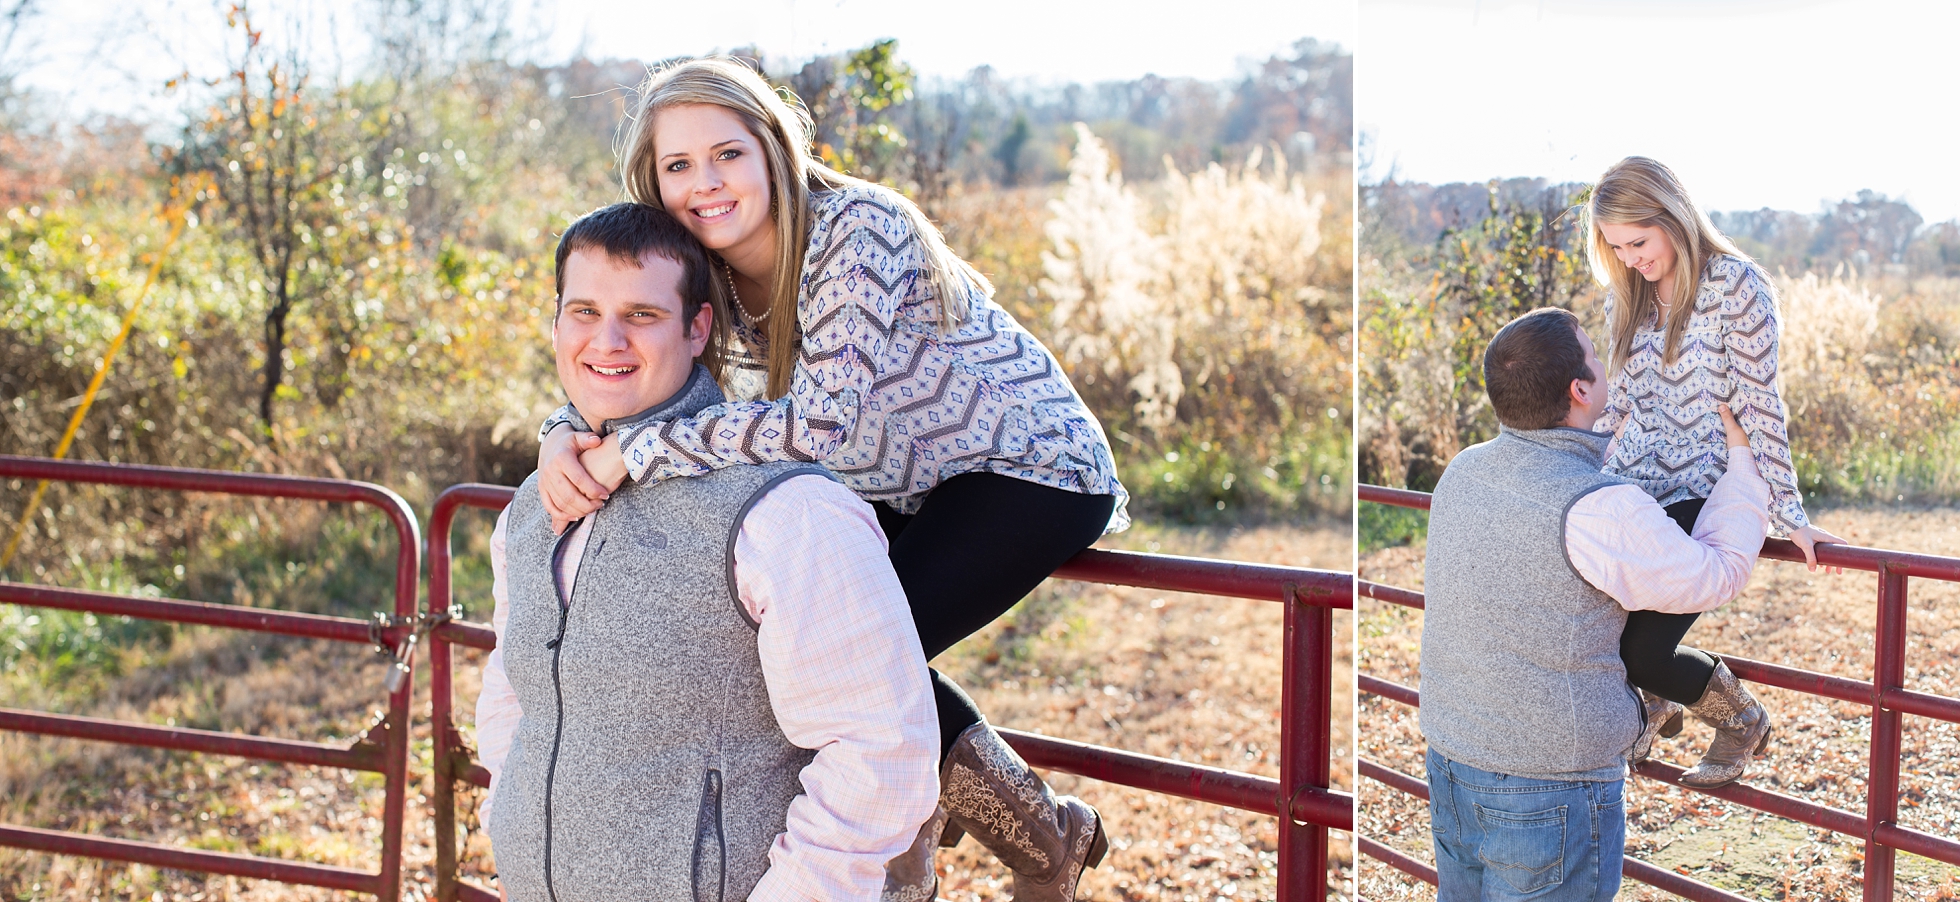 rustic engagement photography